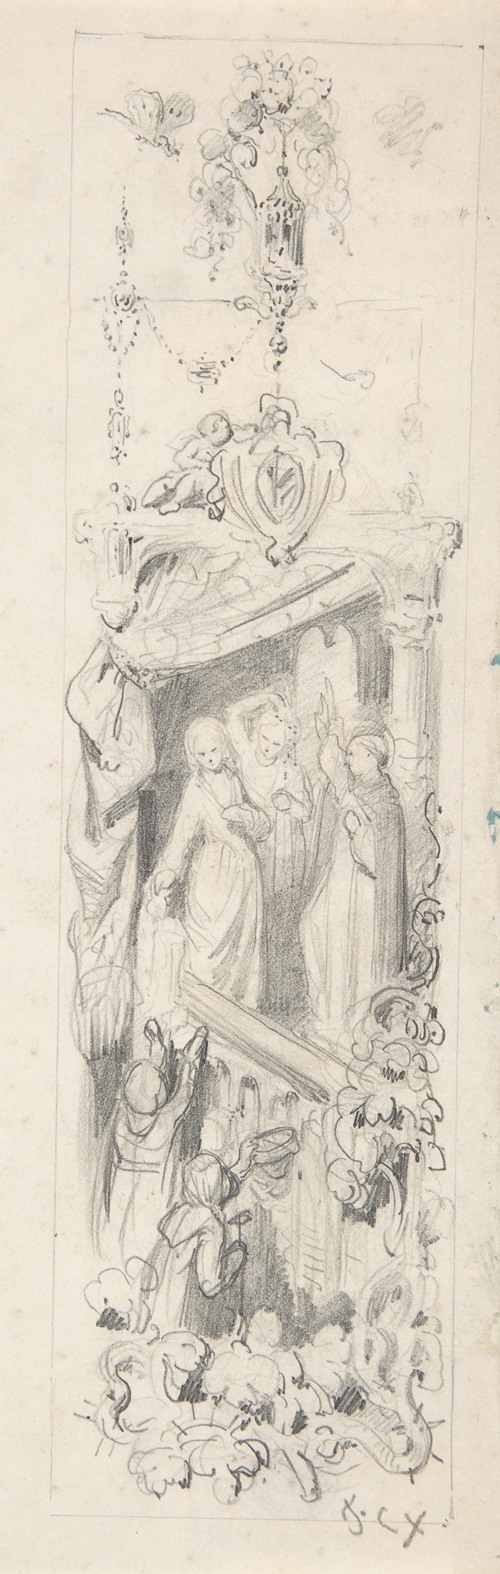 Decorative study of a play (1830-80)